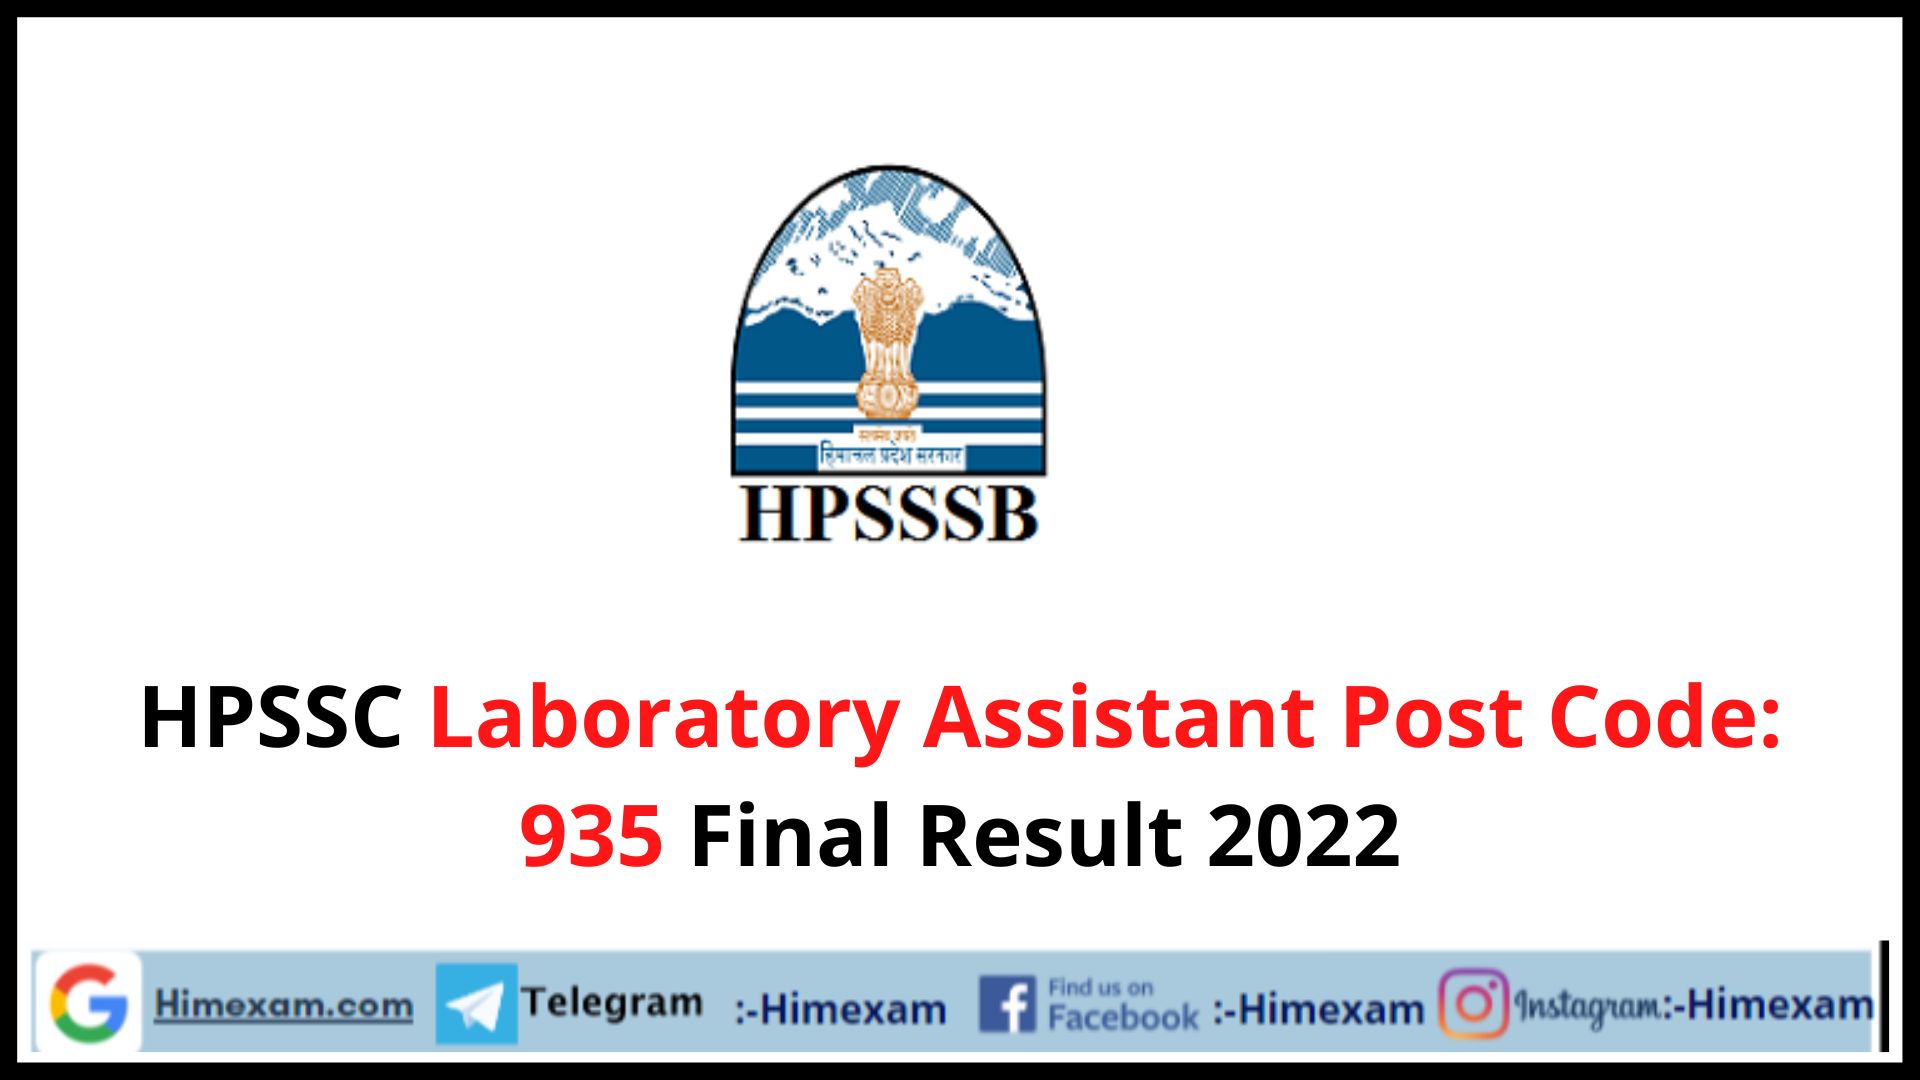 HPSSC Laboratory Assistant Post Code: 935 Final Result 2022